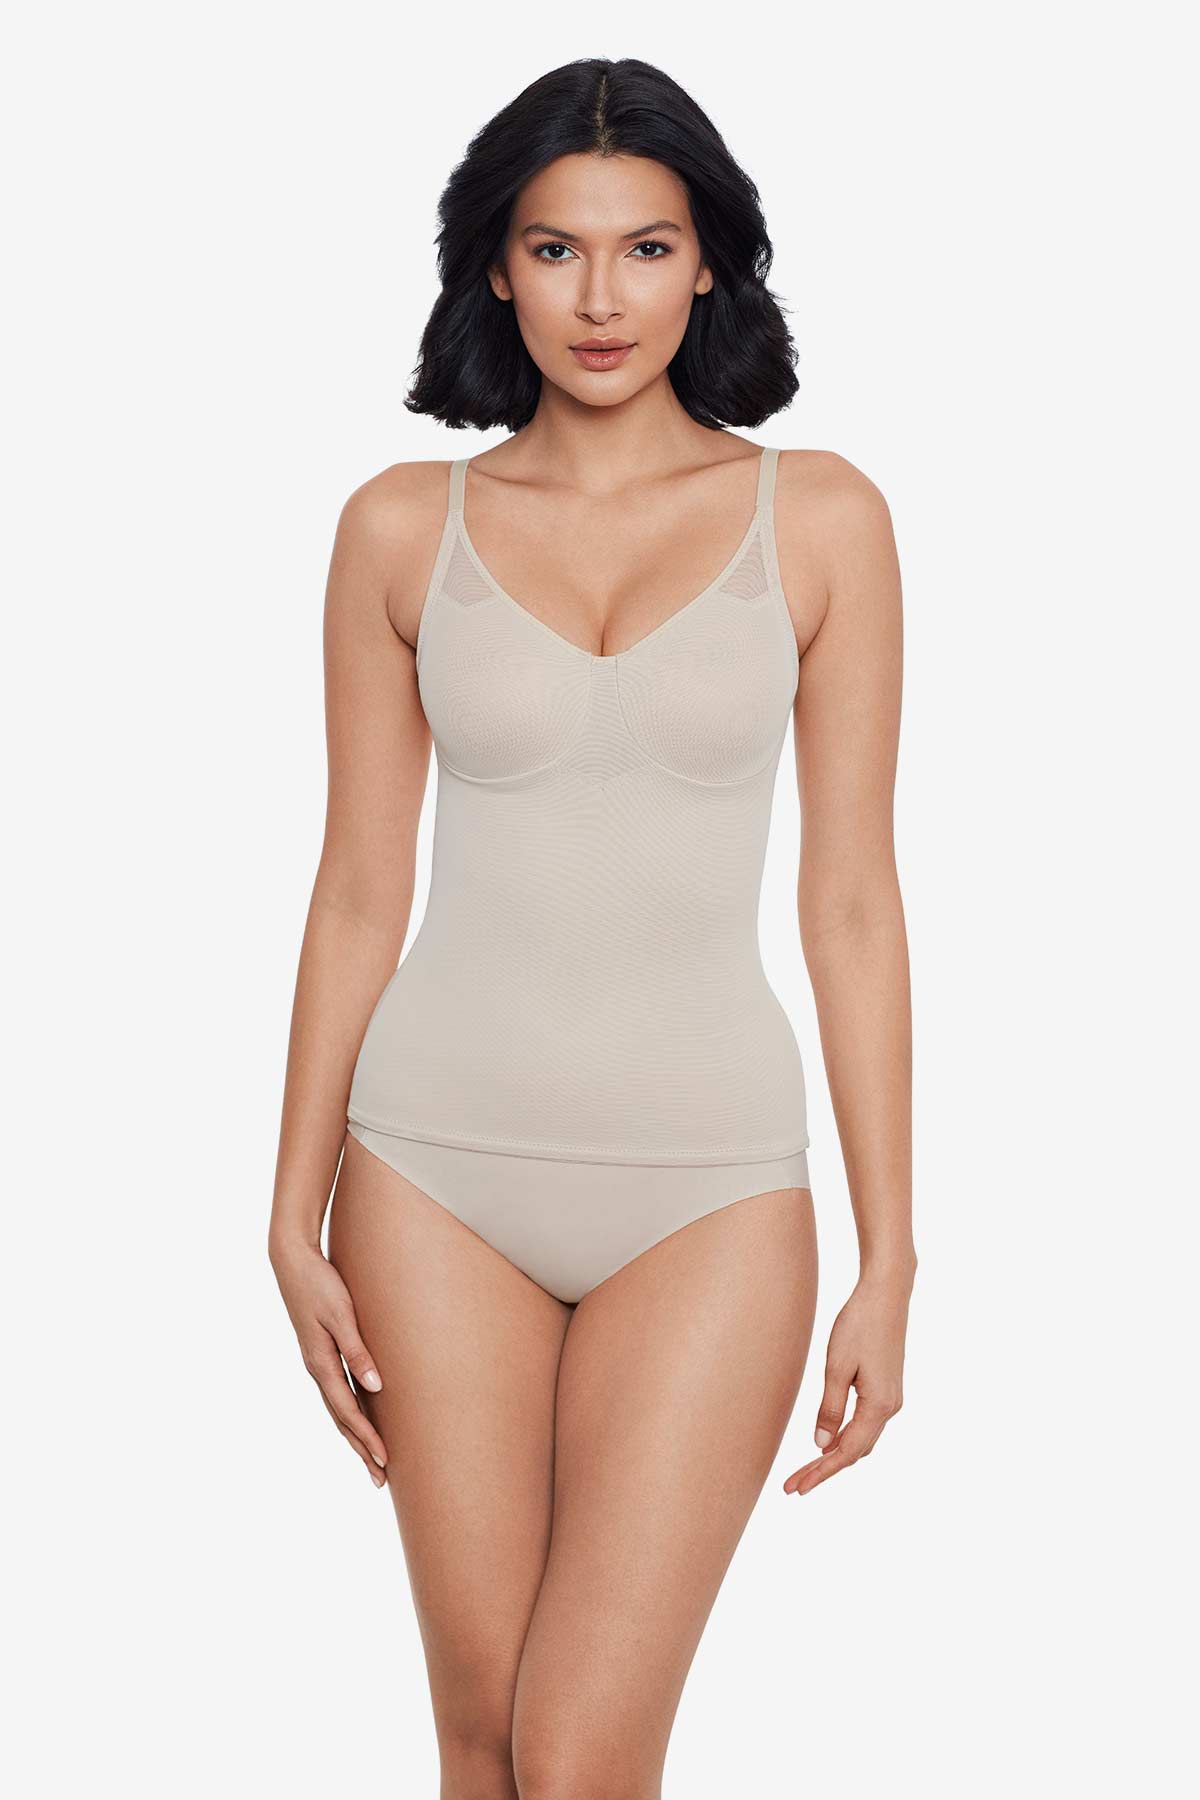 Miraclesuit Shapewear Extra Firm Sexy Sheer Shaping Underwire Camisole